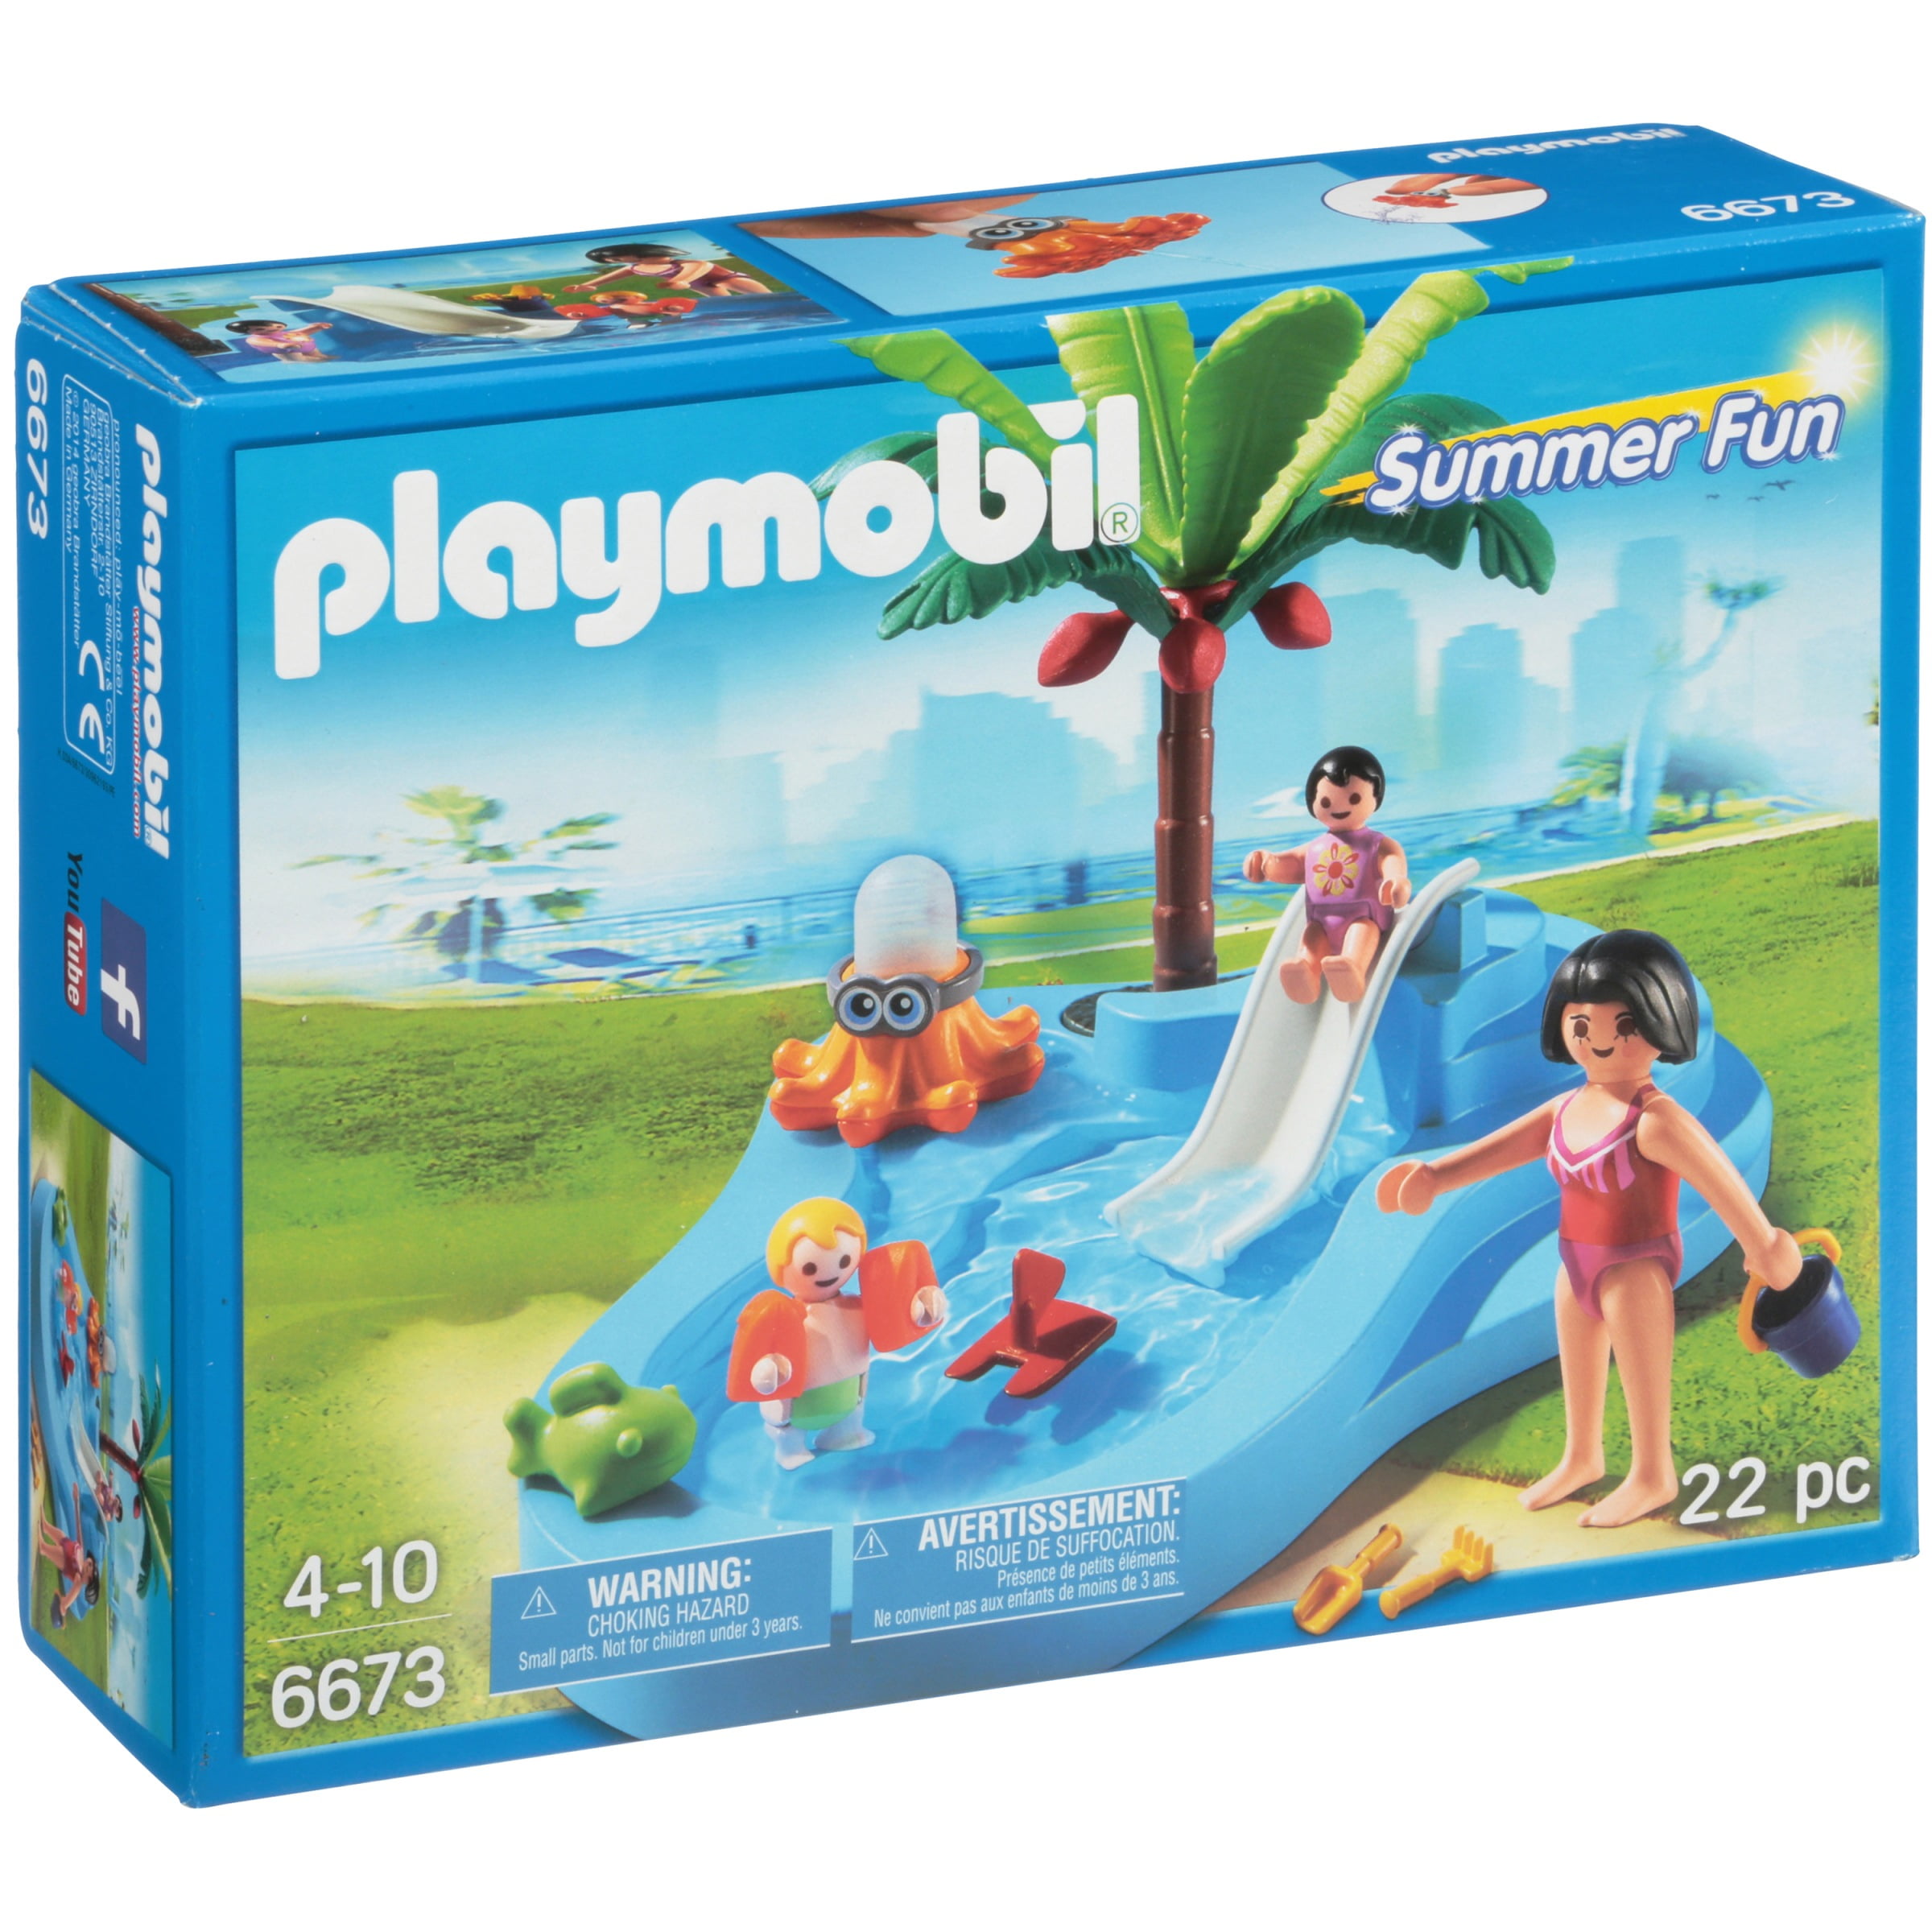 SHALLOW POOL COCONUT PALM TREE Playmobil BABY/TODDLER SLIDE WOMAN 